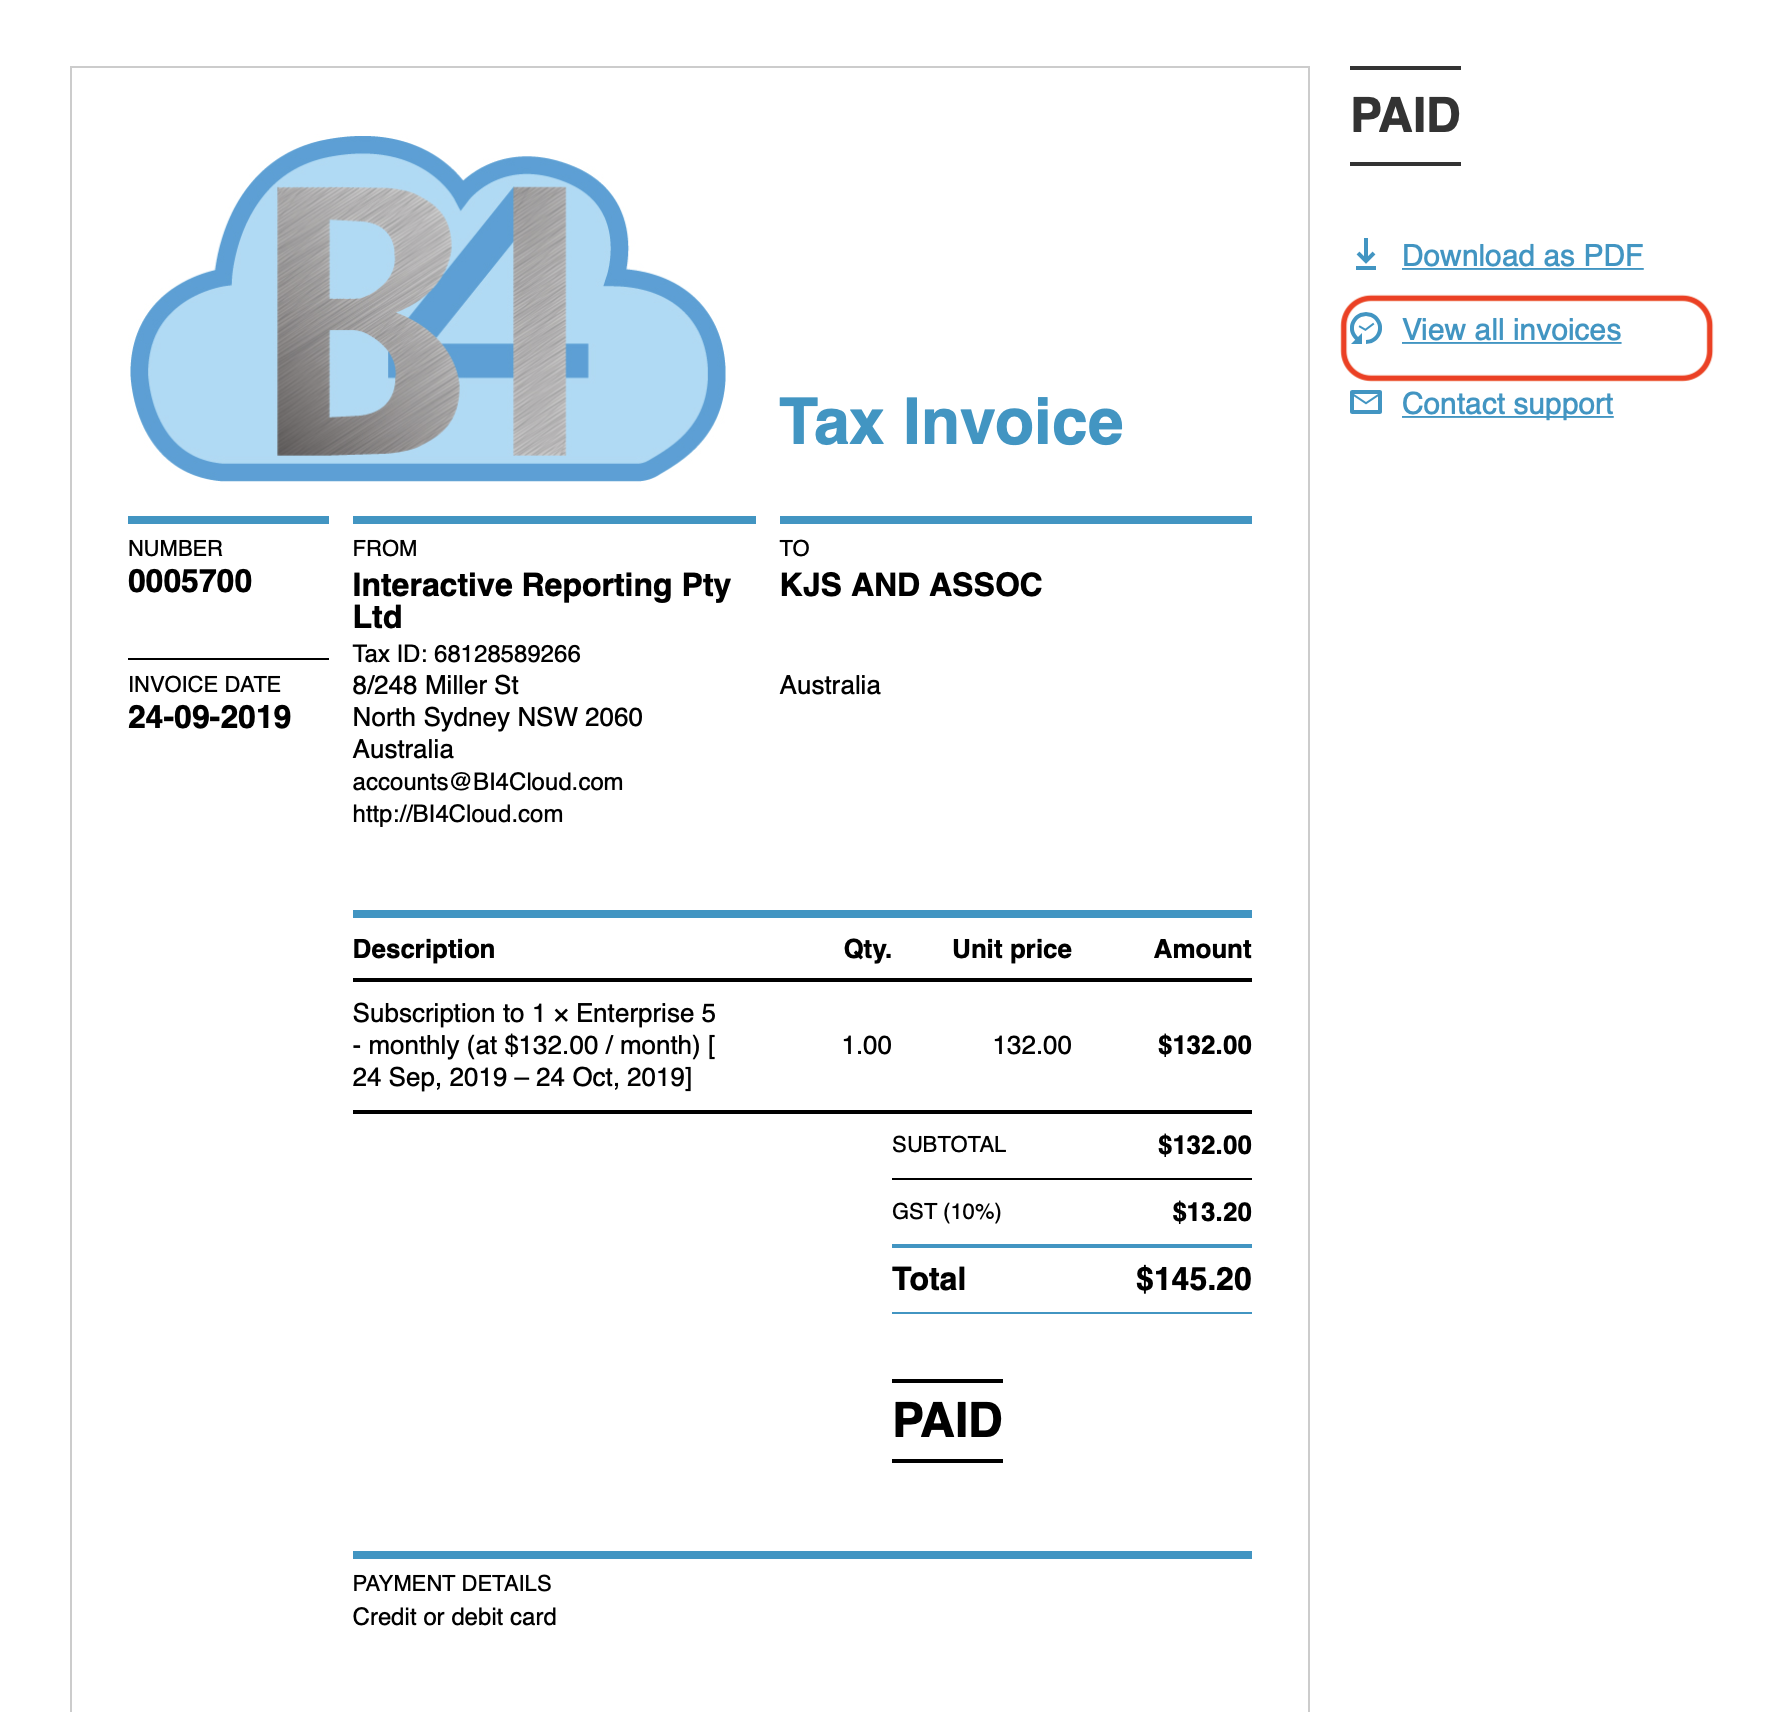 View_Invoice.png